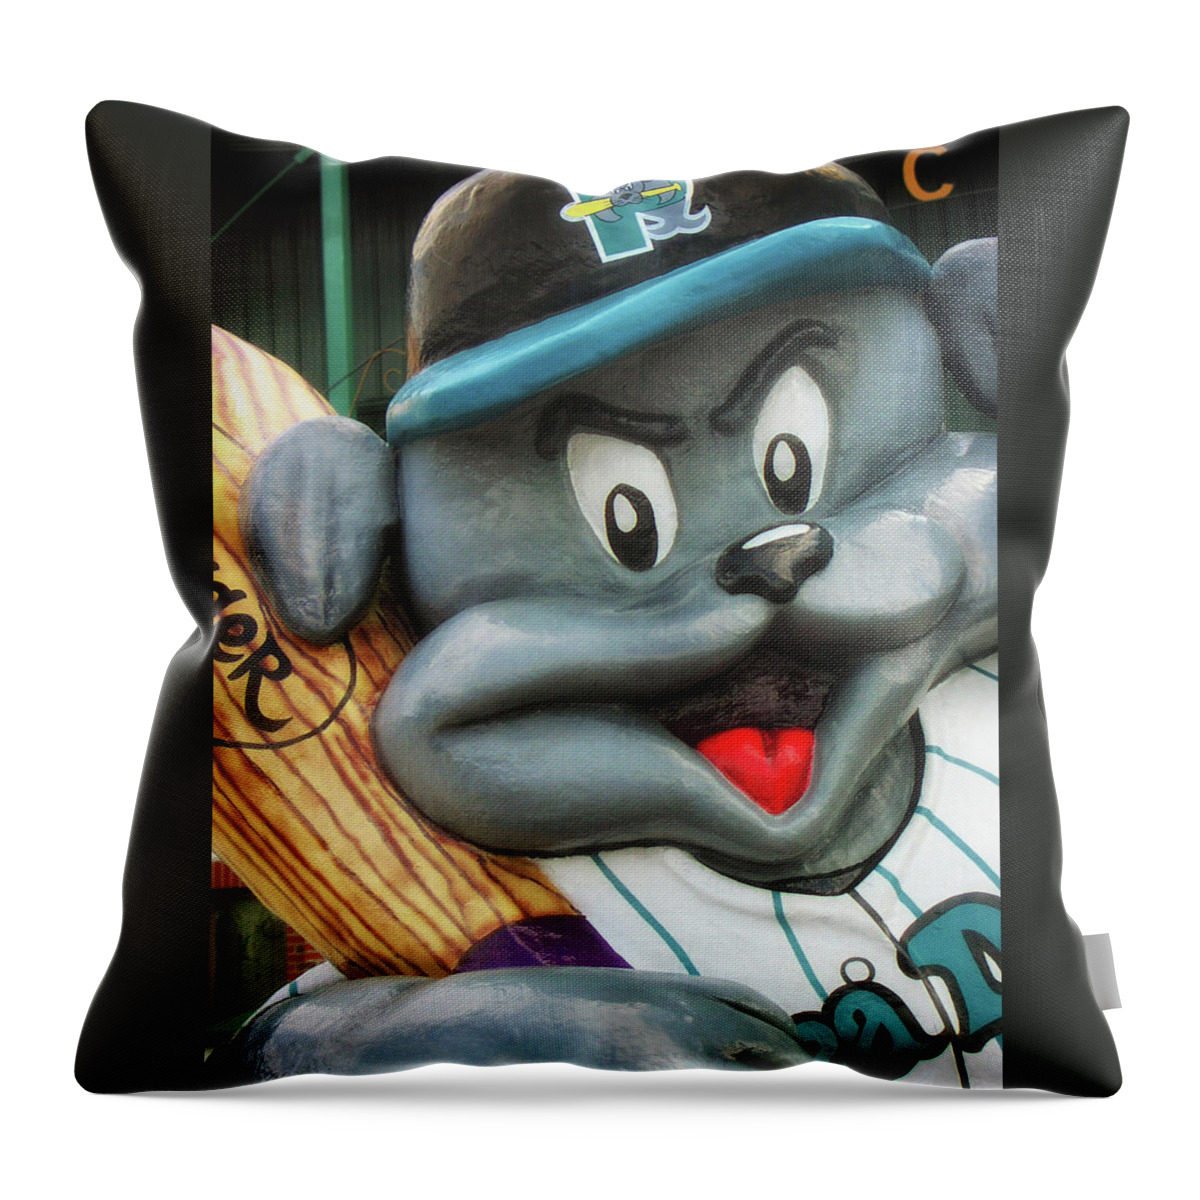 Sport Throw Pillow featuring the photograph Portland Sea Dogs by Mike Martin